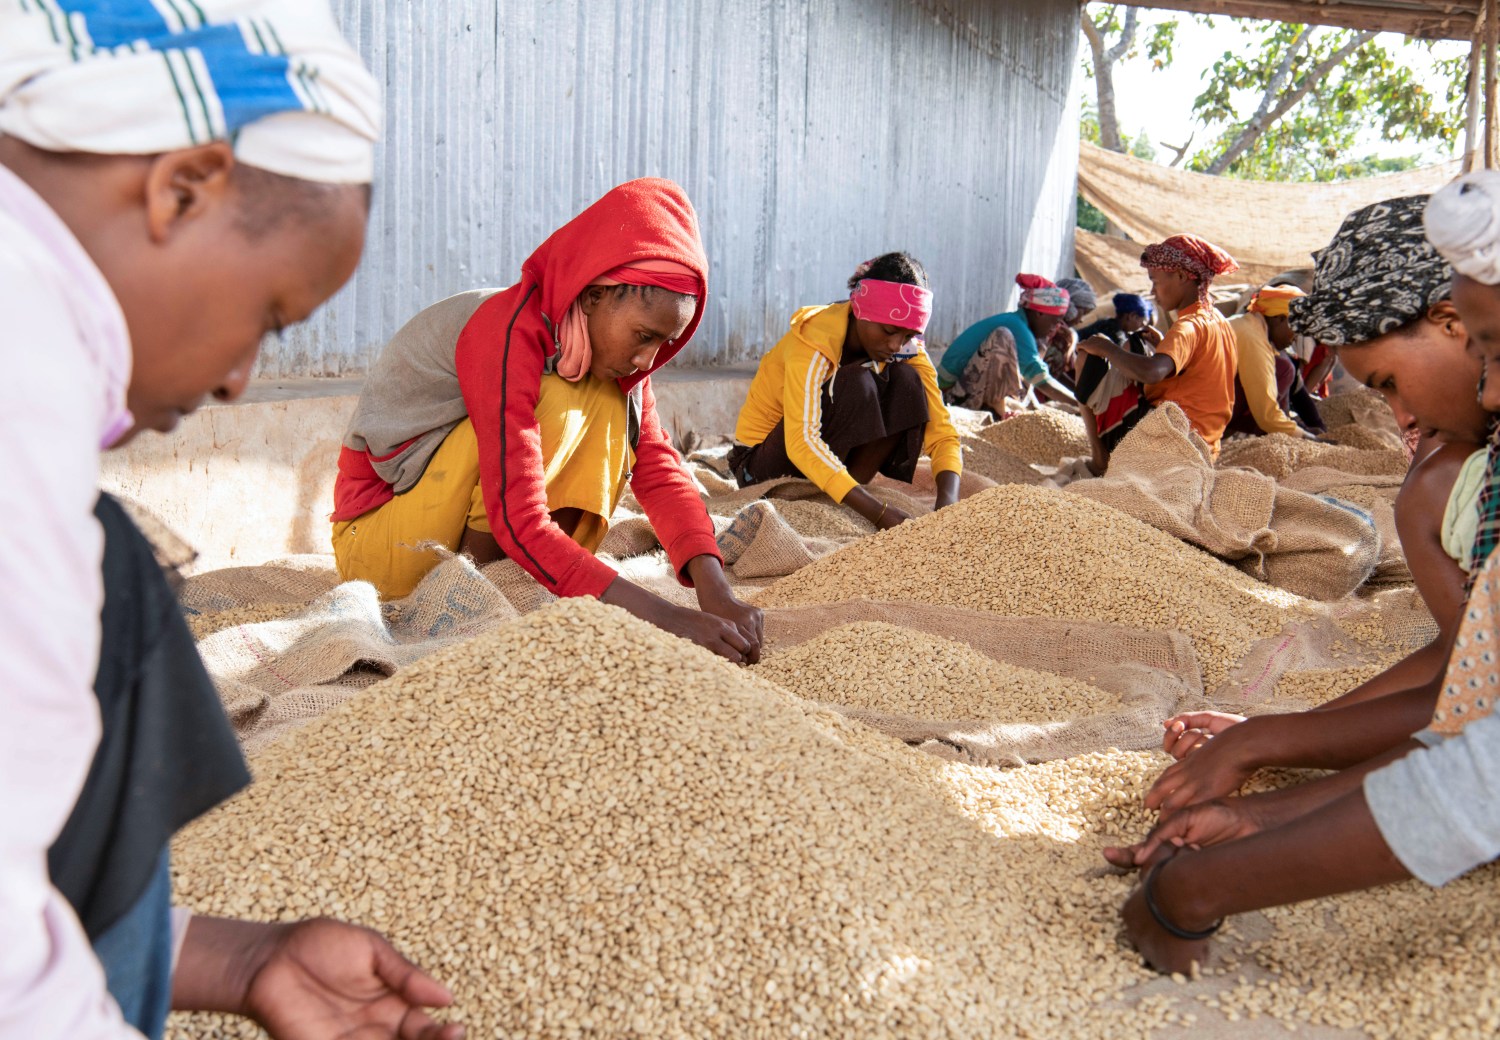 Women pick unwanted coffee beans from the final product just before packaging in Holiso cooperative of Shebedino district in Sidama, Ethiopia November 30, 2018. Picture taken November 30, 2018. REUTERS/Maheder Haileselassie - RC1A79217960